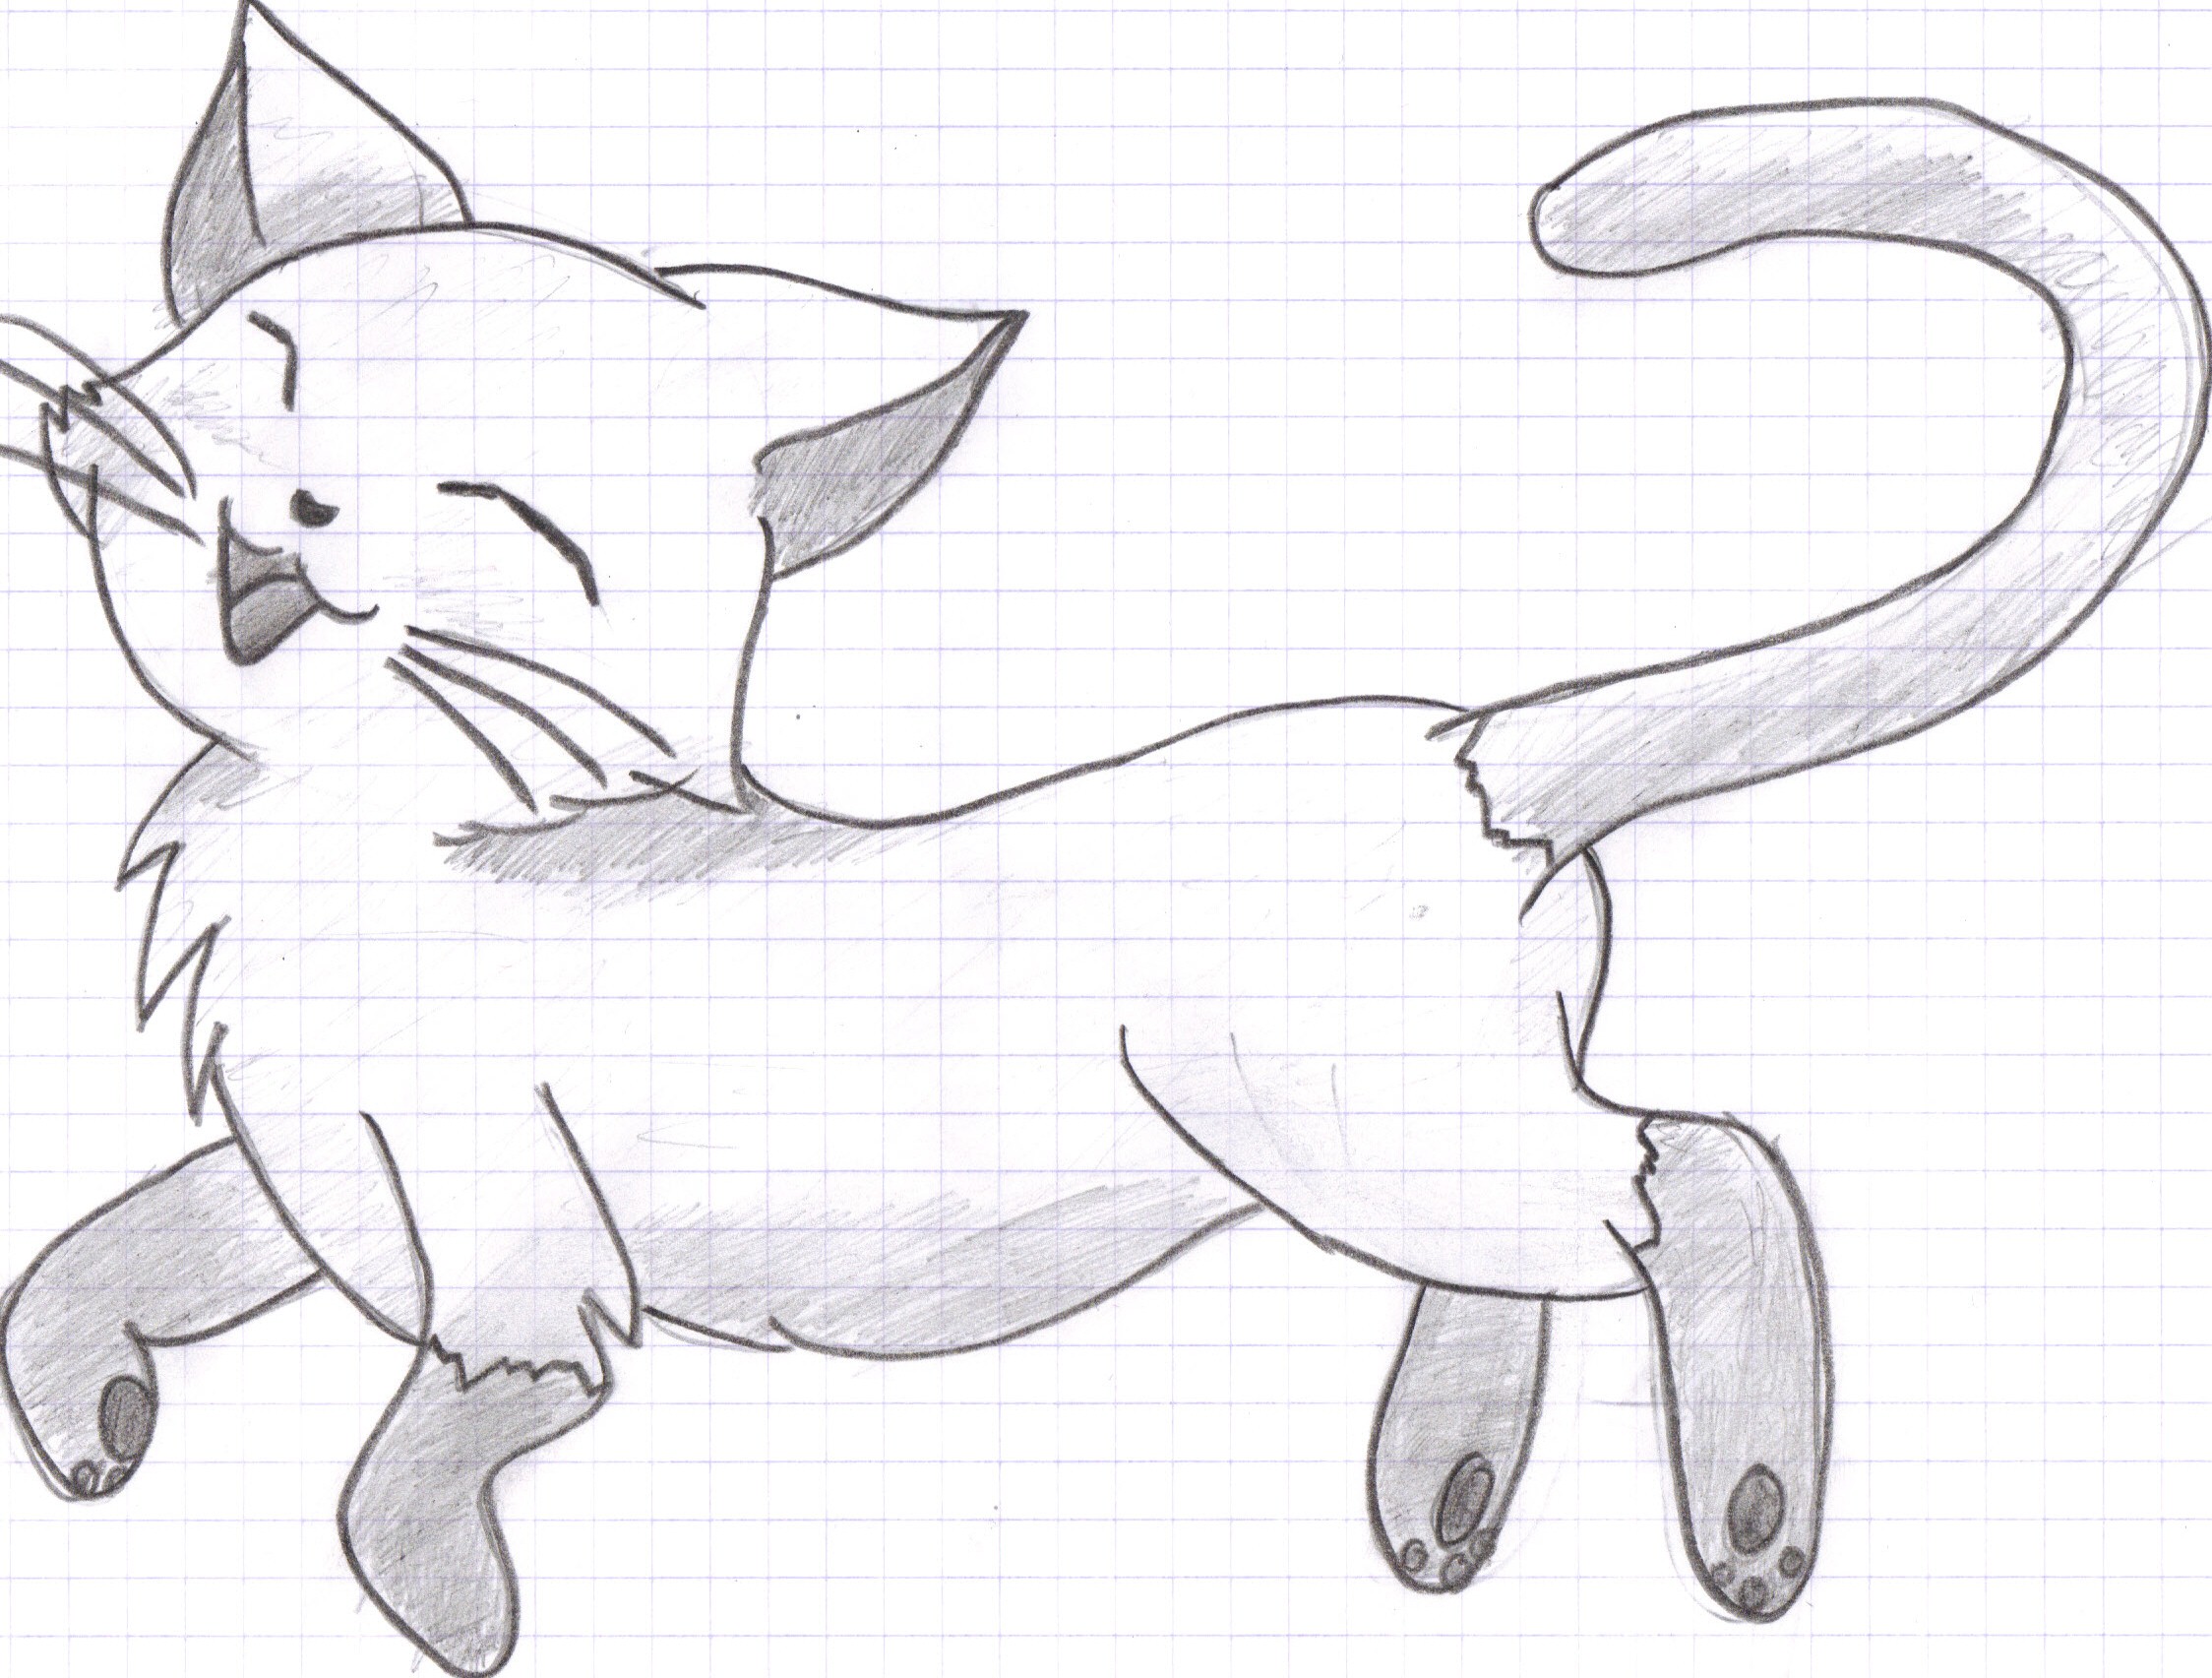 Free Cat Drawing, Download Free Cat Drawing png images, Free ClipArts ...
 Cats Drawing Tumblr